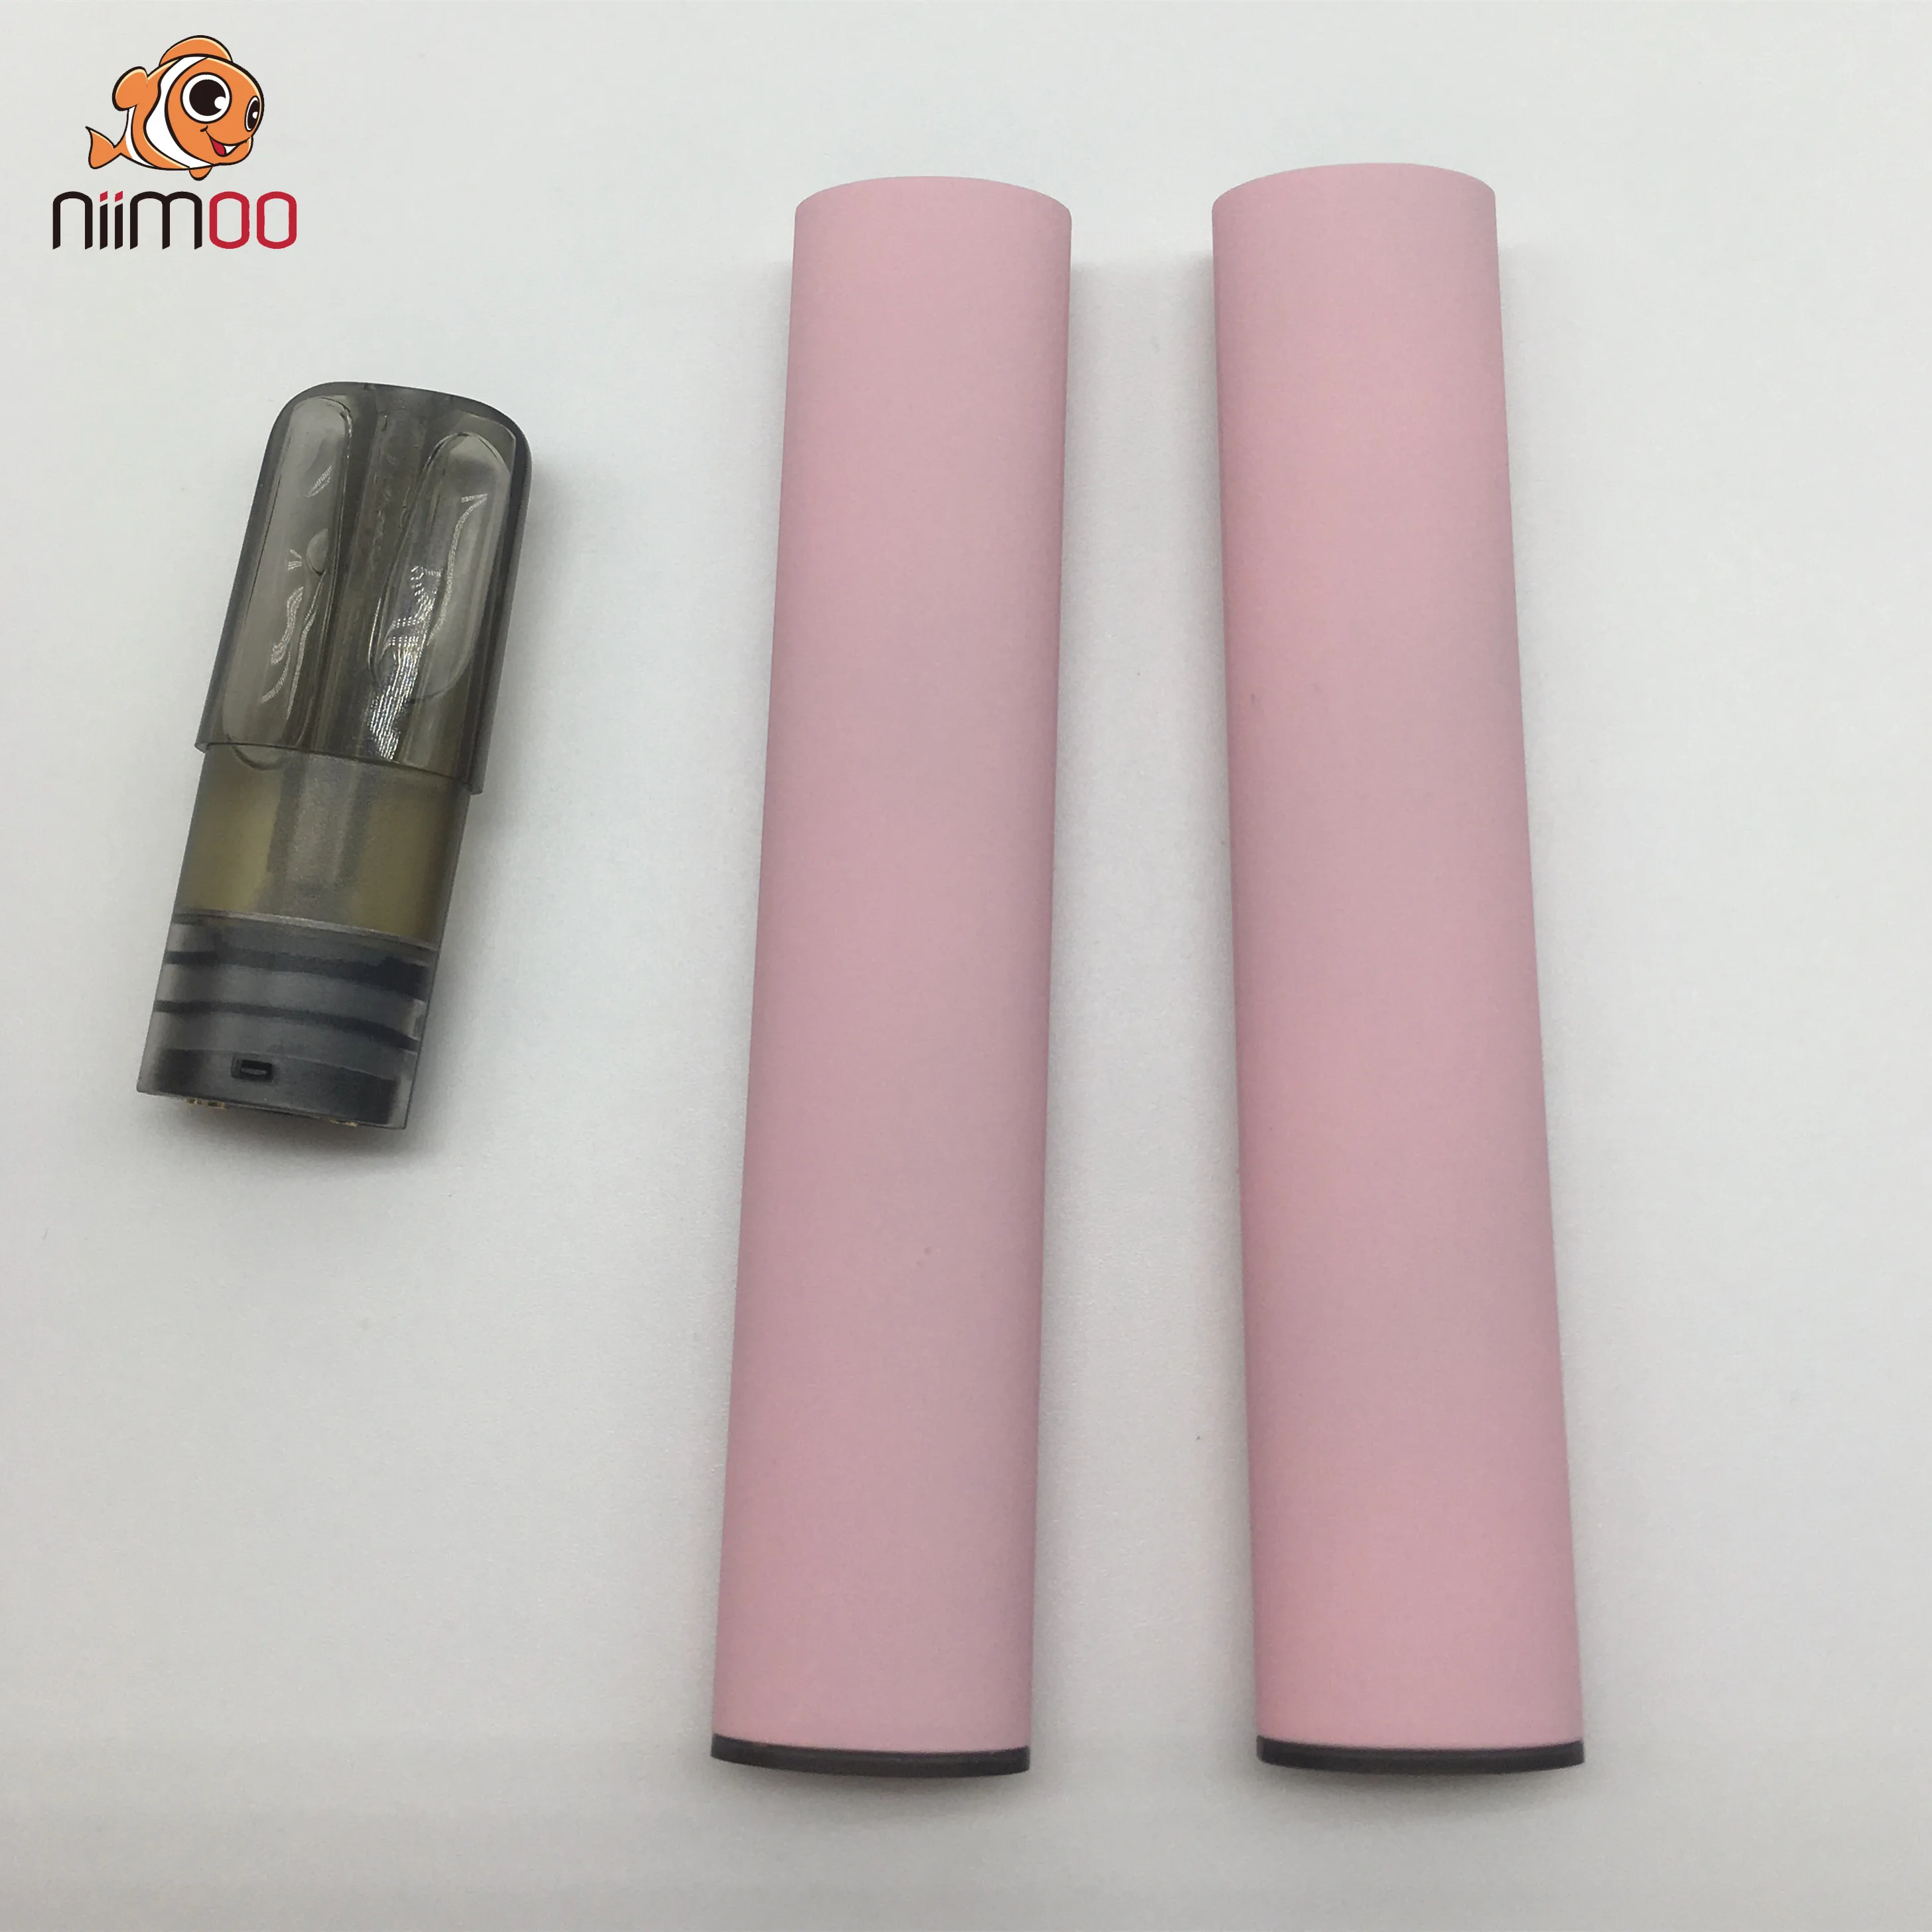 Niimoo high quality vaporizer Battery Pod System Rechargeable 290Mah oem odm available atomizer DDP door to door